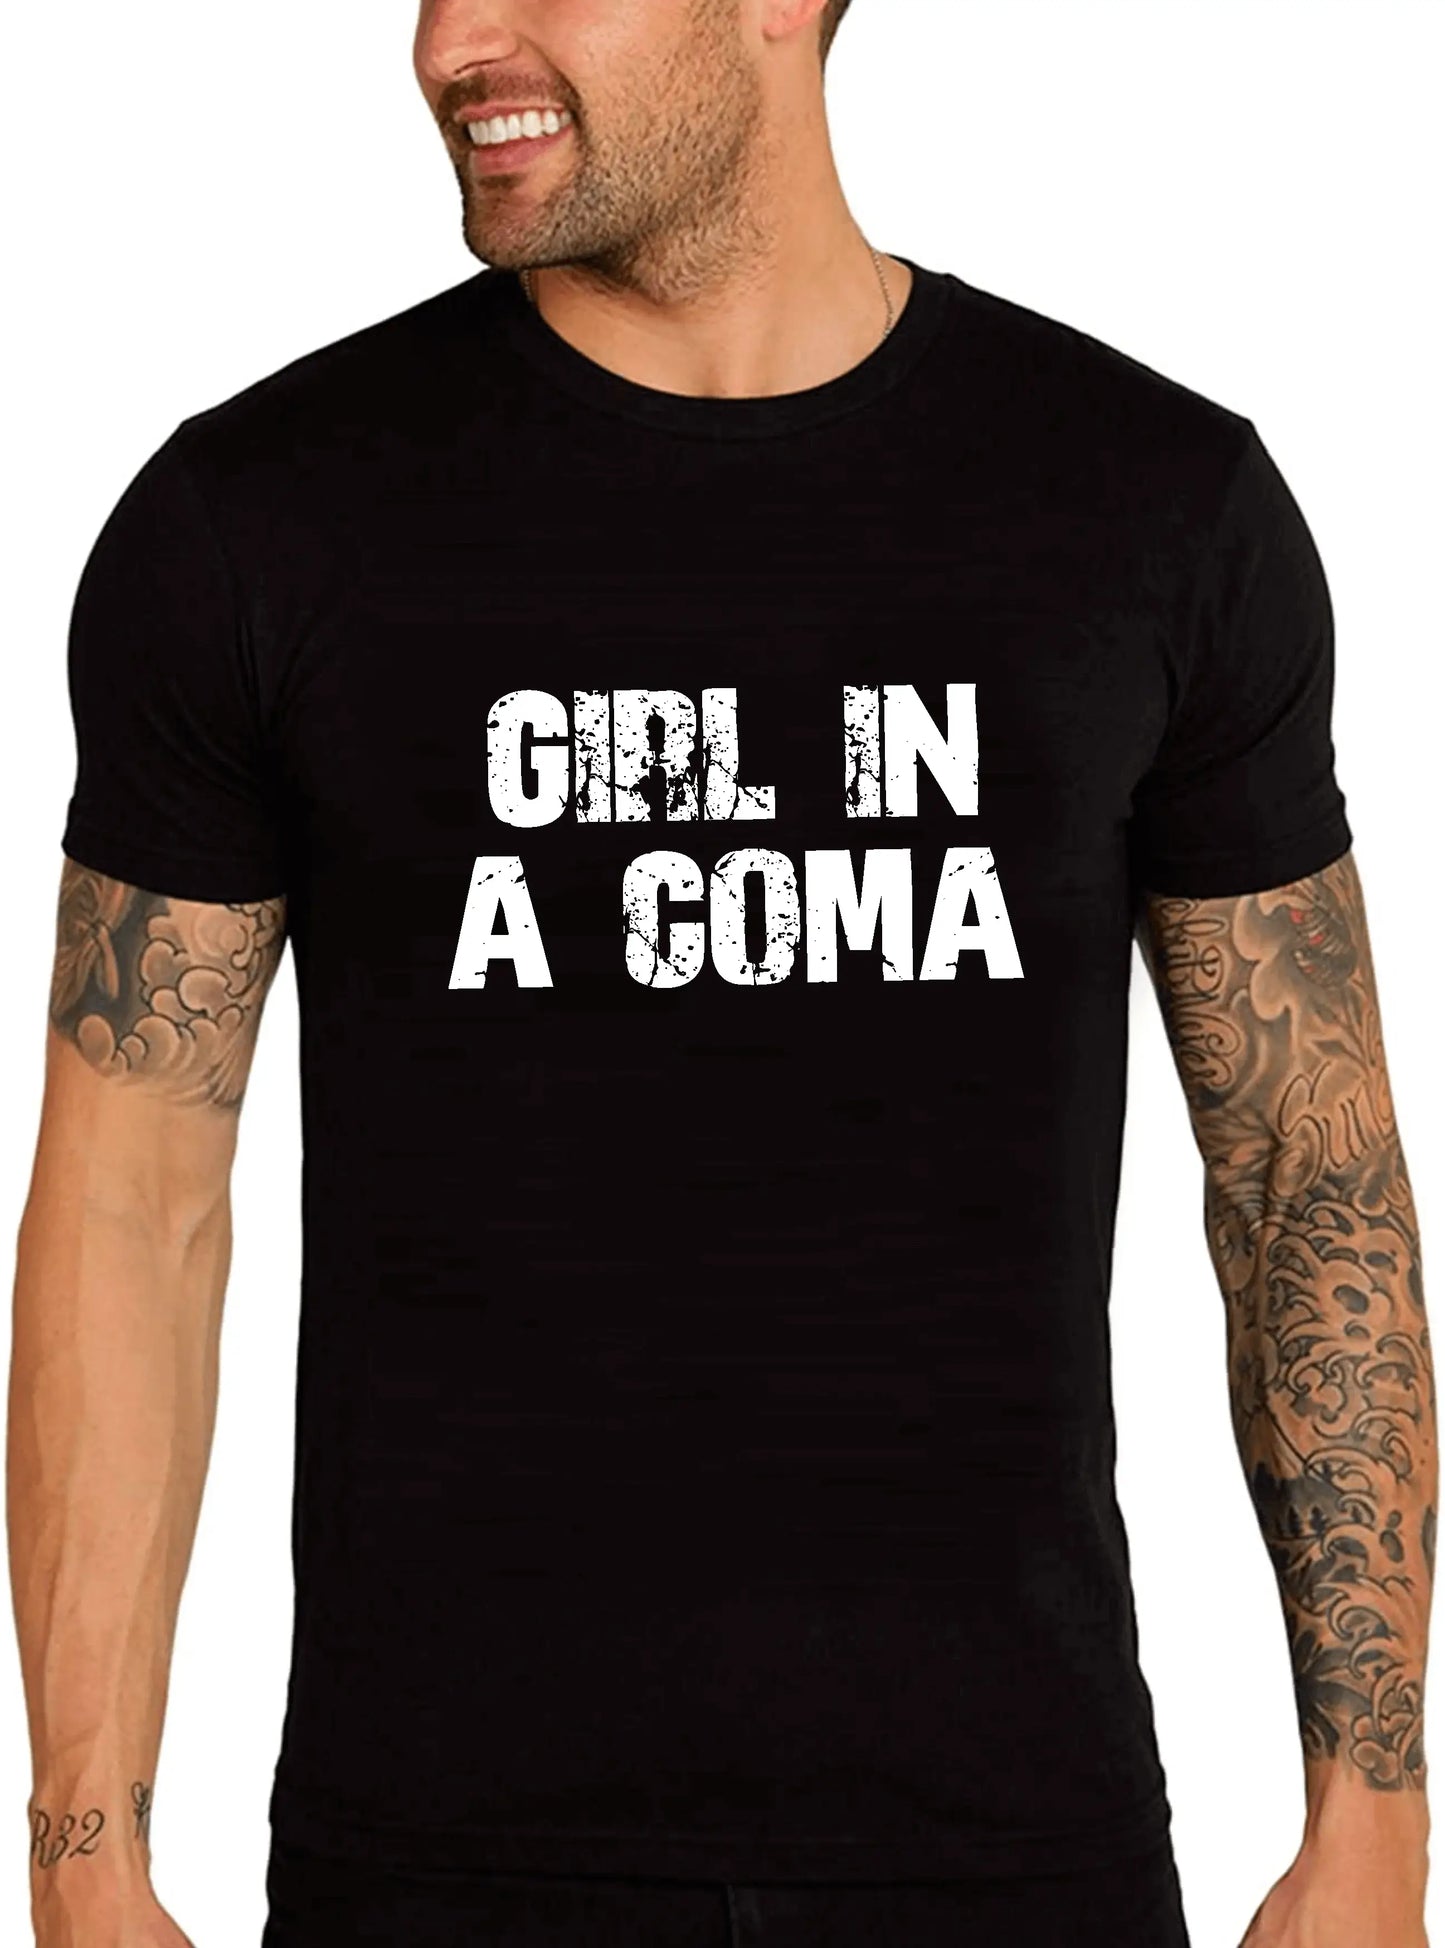 Men's Graphic T-Shirt Girl In A Coma Eco-Friendly Limited Edition Short Sleeve Tee-Shirt Vintage Birthday Gift Novelty